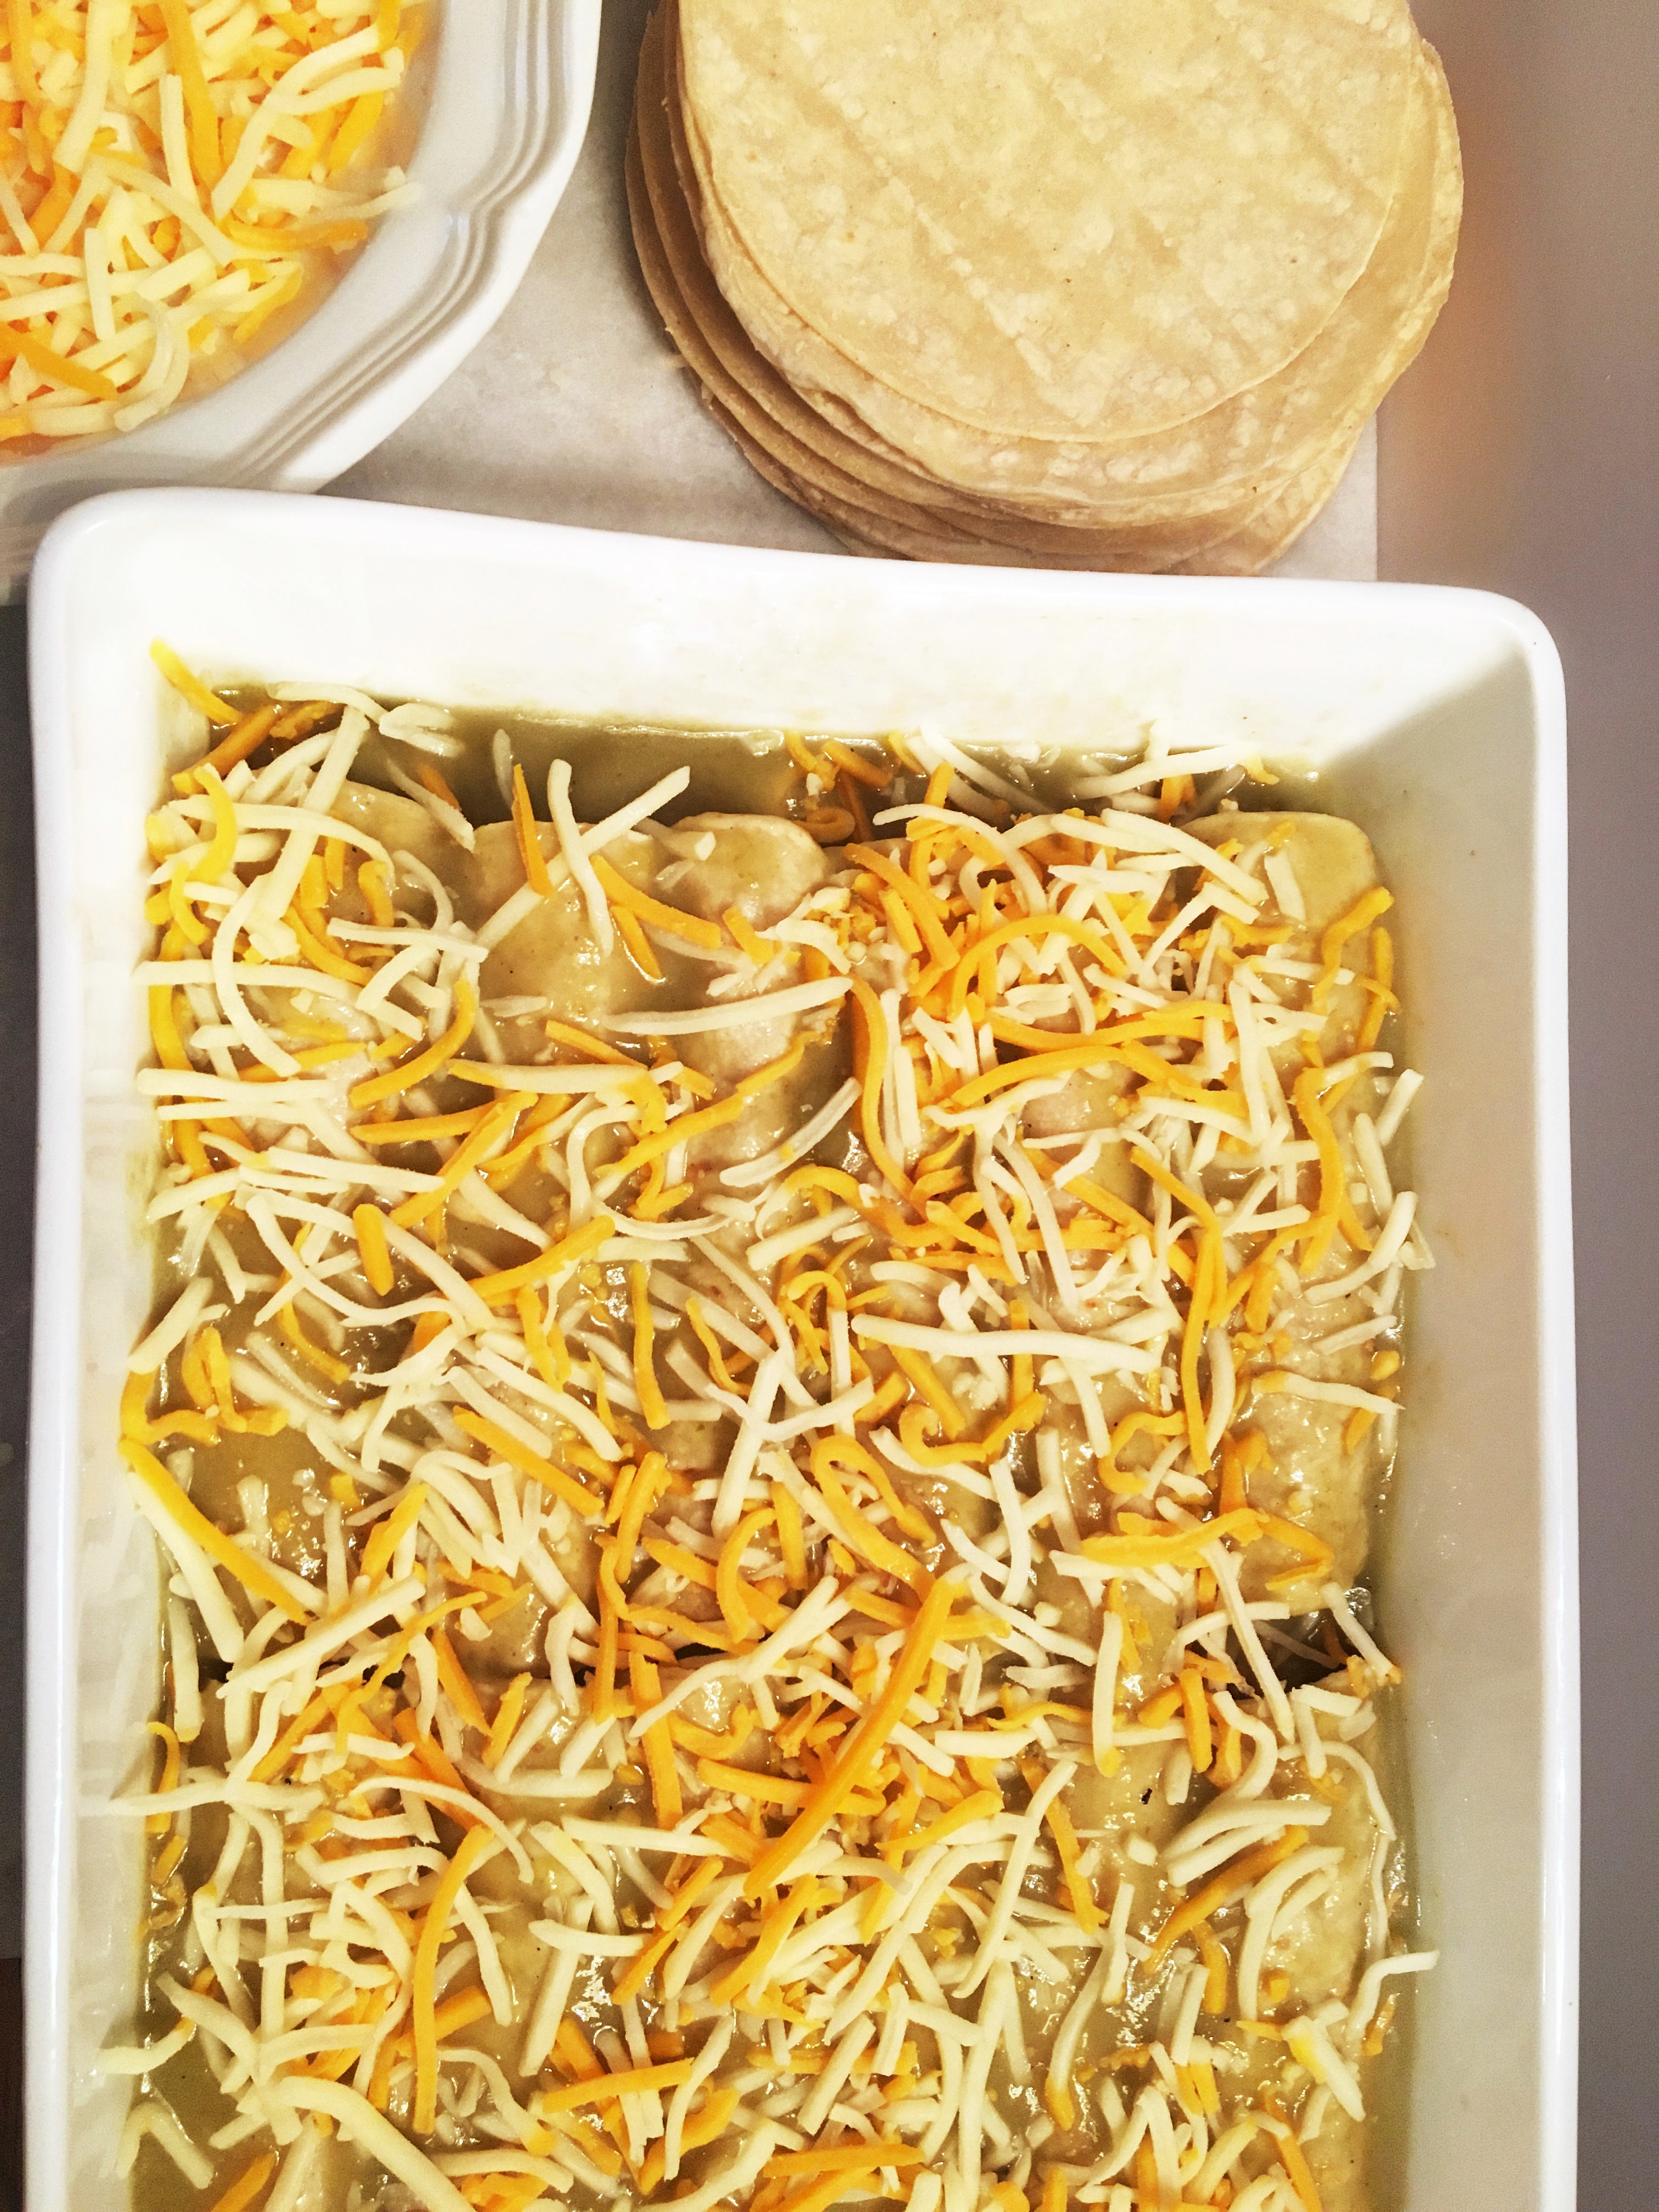 Try our cheesy Green Chile Chicken enchiladas with a flavorful green sauce